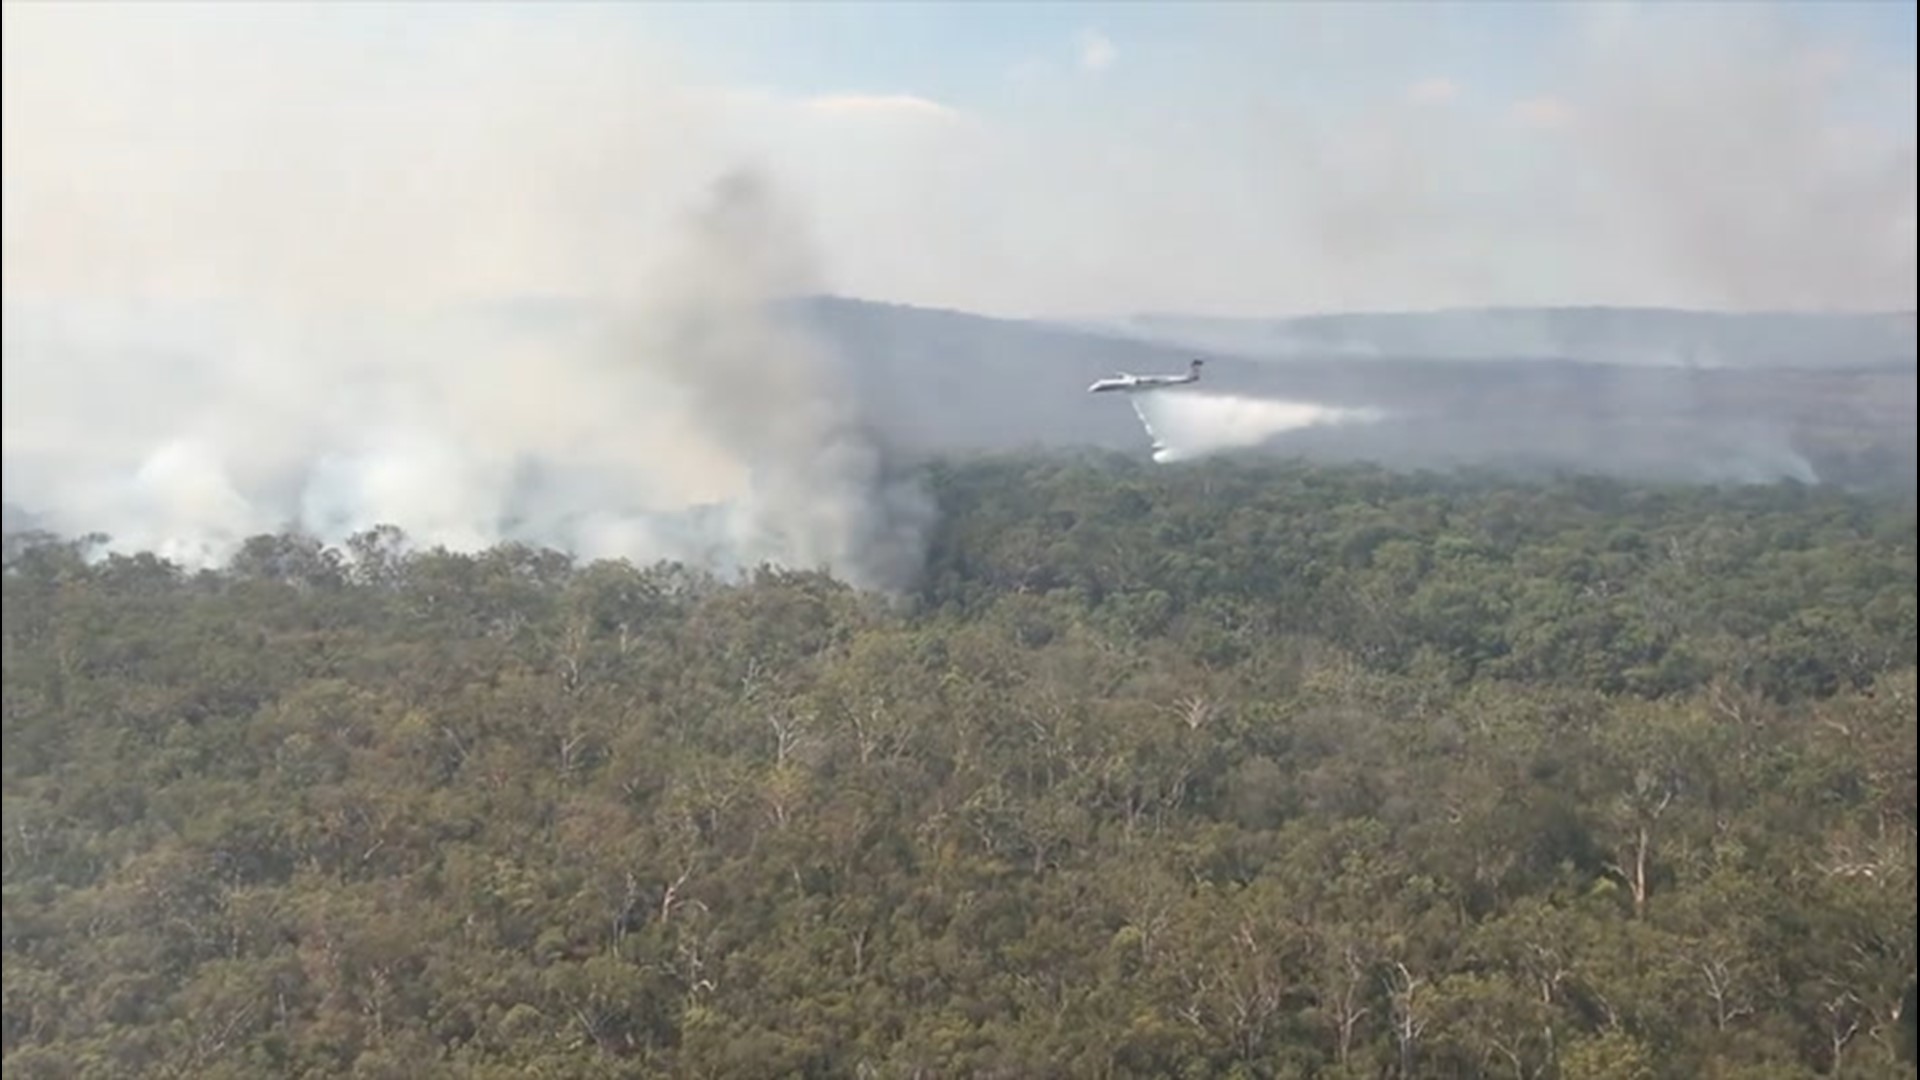 A large air tanker dropped fire suppressant to support fire crews on the ground battling a bush fire on Fraser Island, Queensland, on Nov. 22.